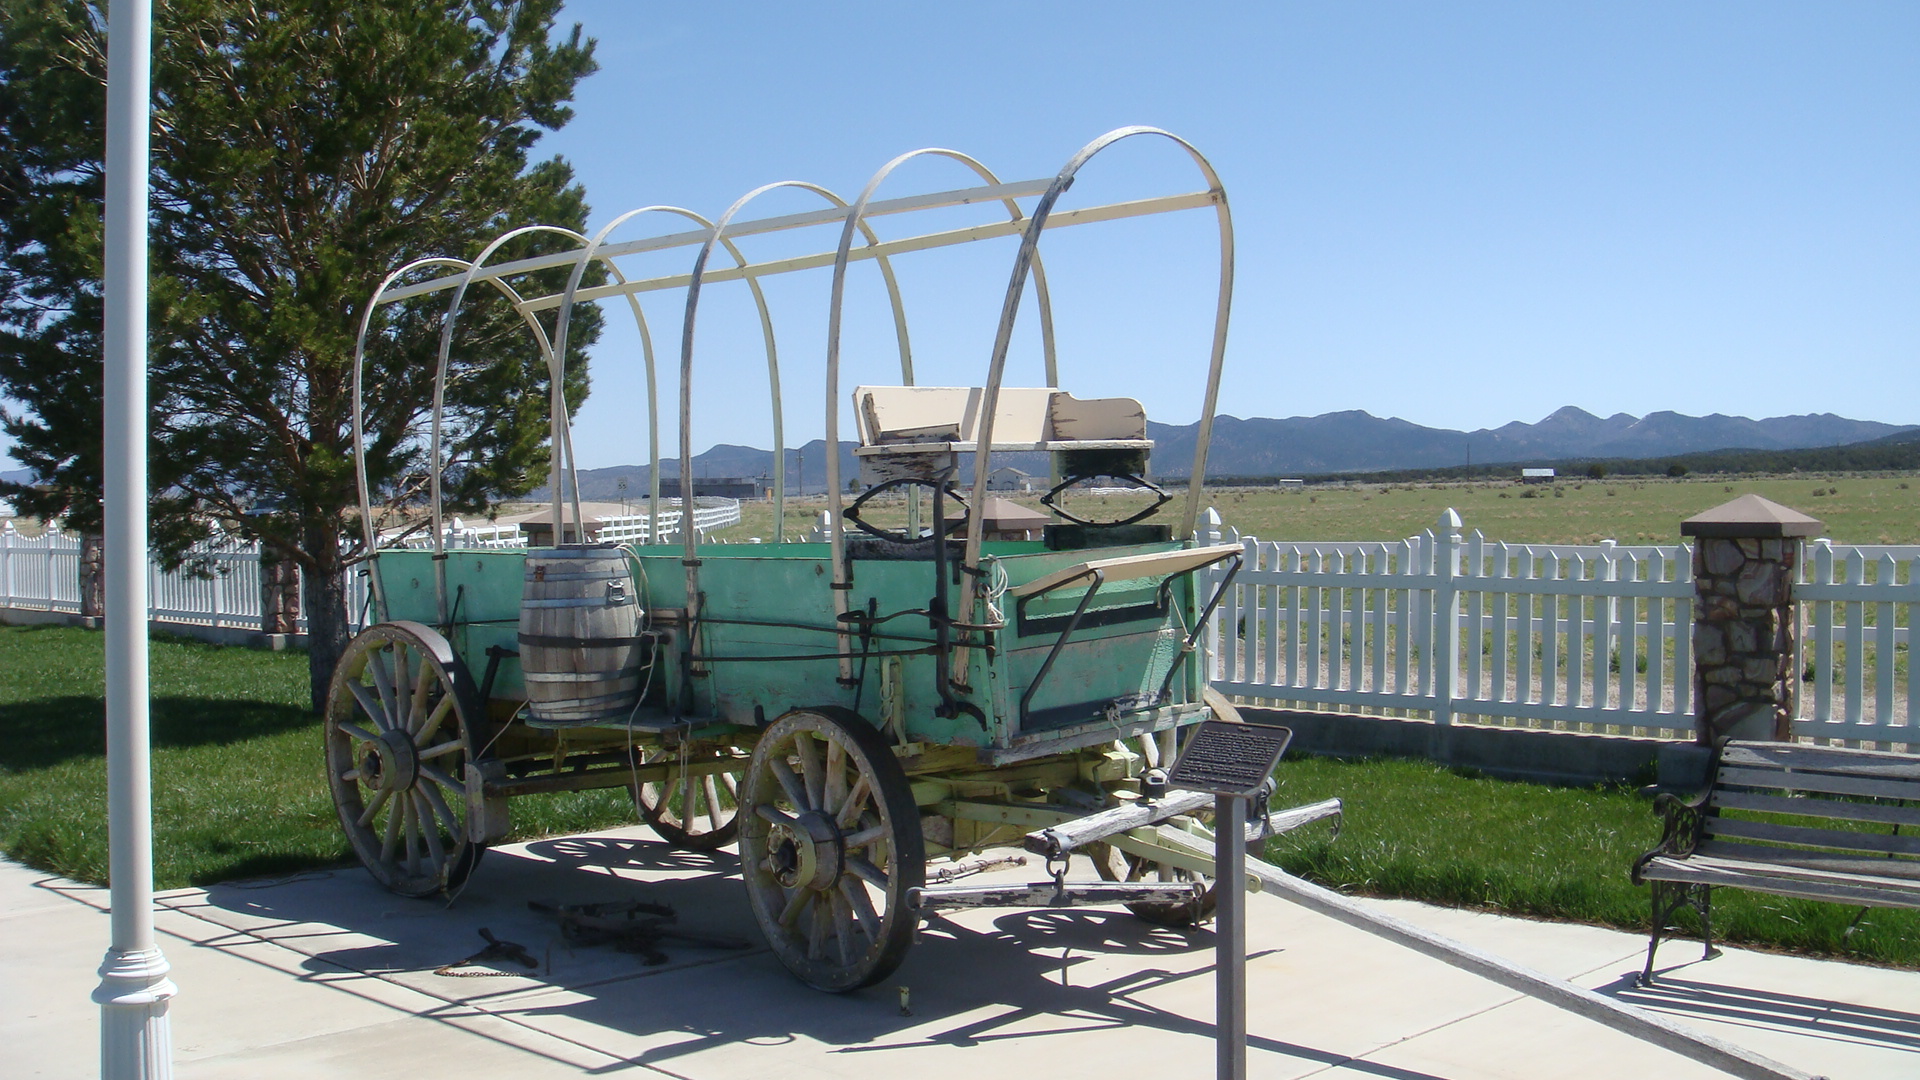 A wagon on display at the Terry Family Heritage Park